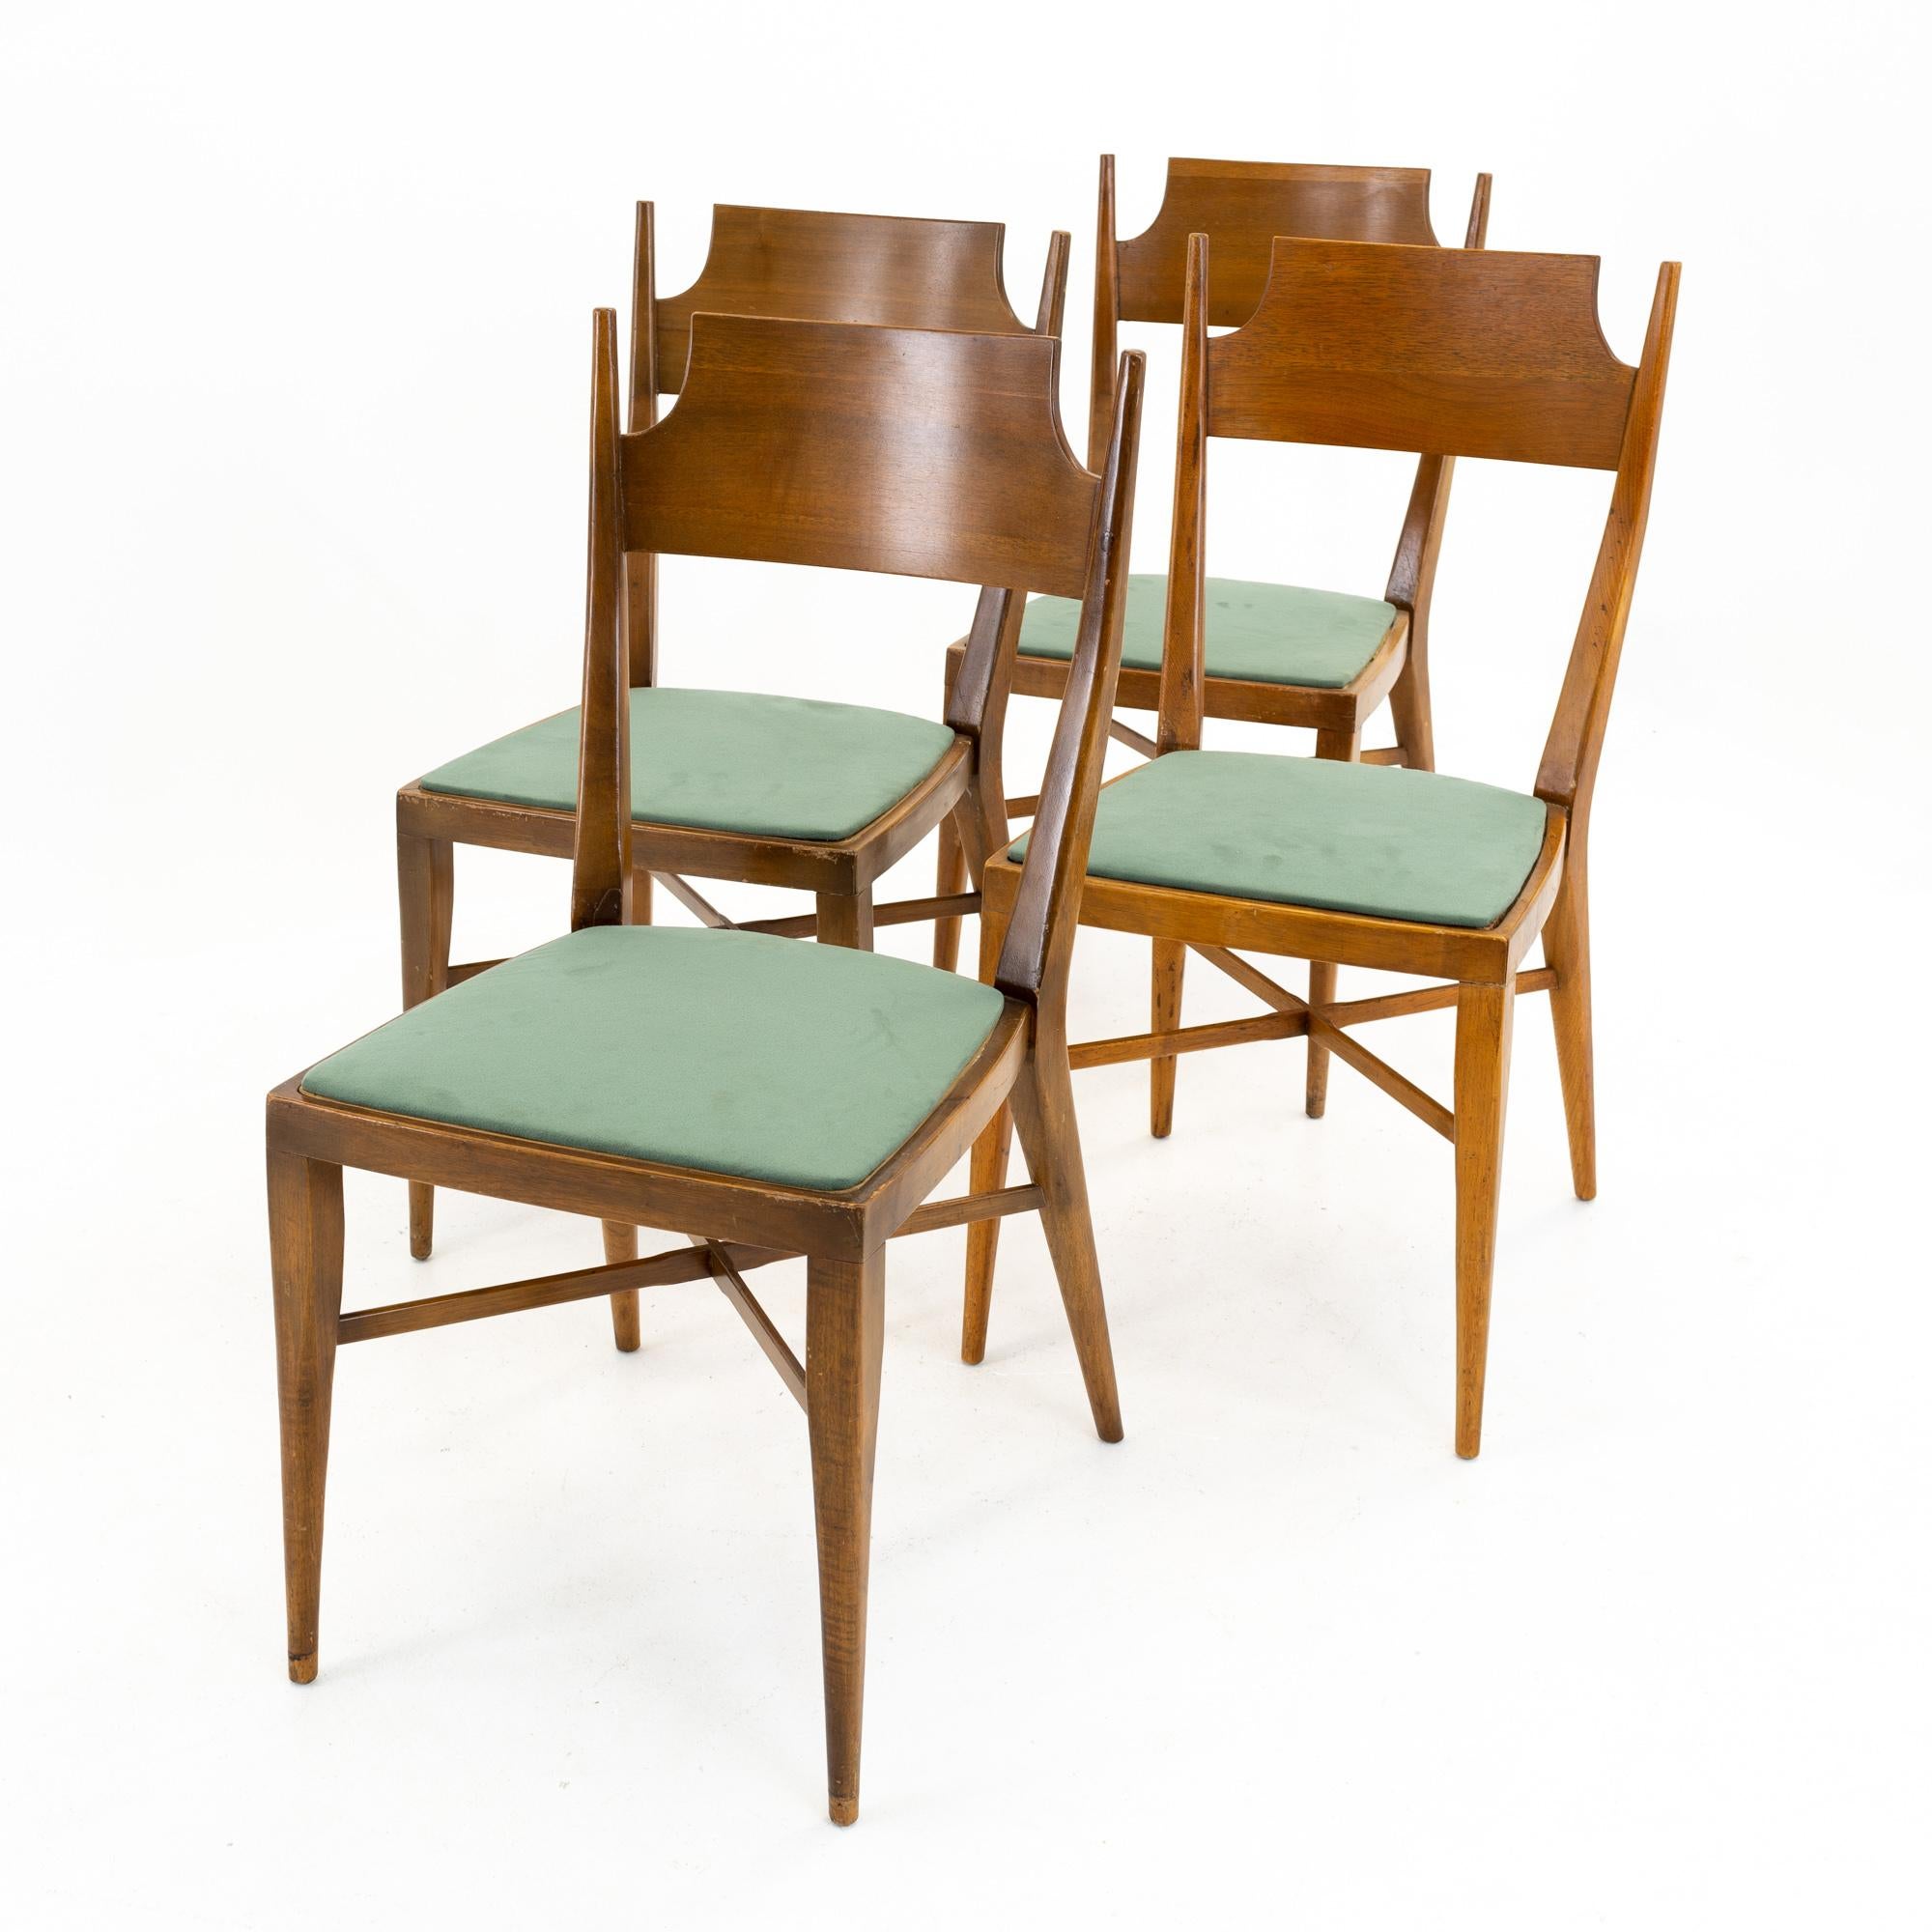 Paul McCobb mid century Connoisseur dining chairs - Set of 4
Each chair measures 16.5 wide x 20.5 deep x 34 high with a seat height of 17.5 inches

All pieces of furniture can be had in what we call restored vintage condition. That means the